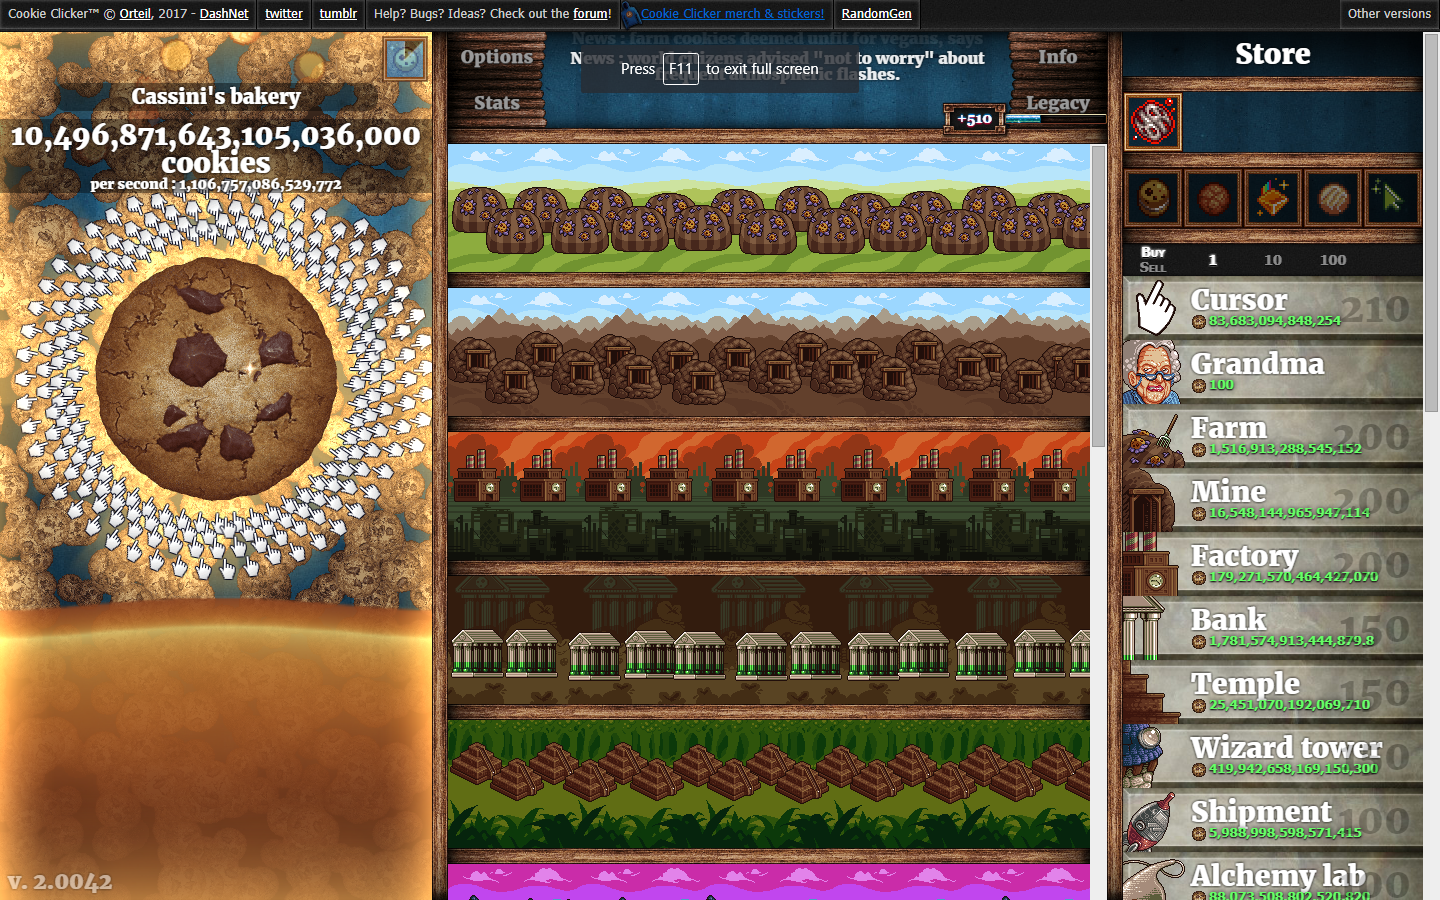 Halloween Cookies Cookie Clicker Popular Ideas of All Time